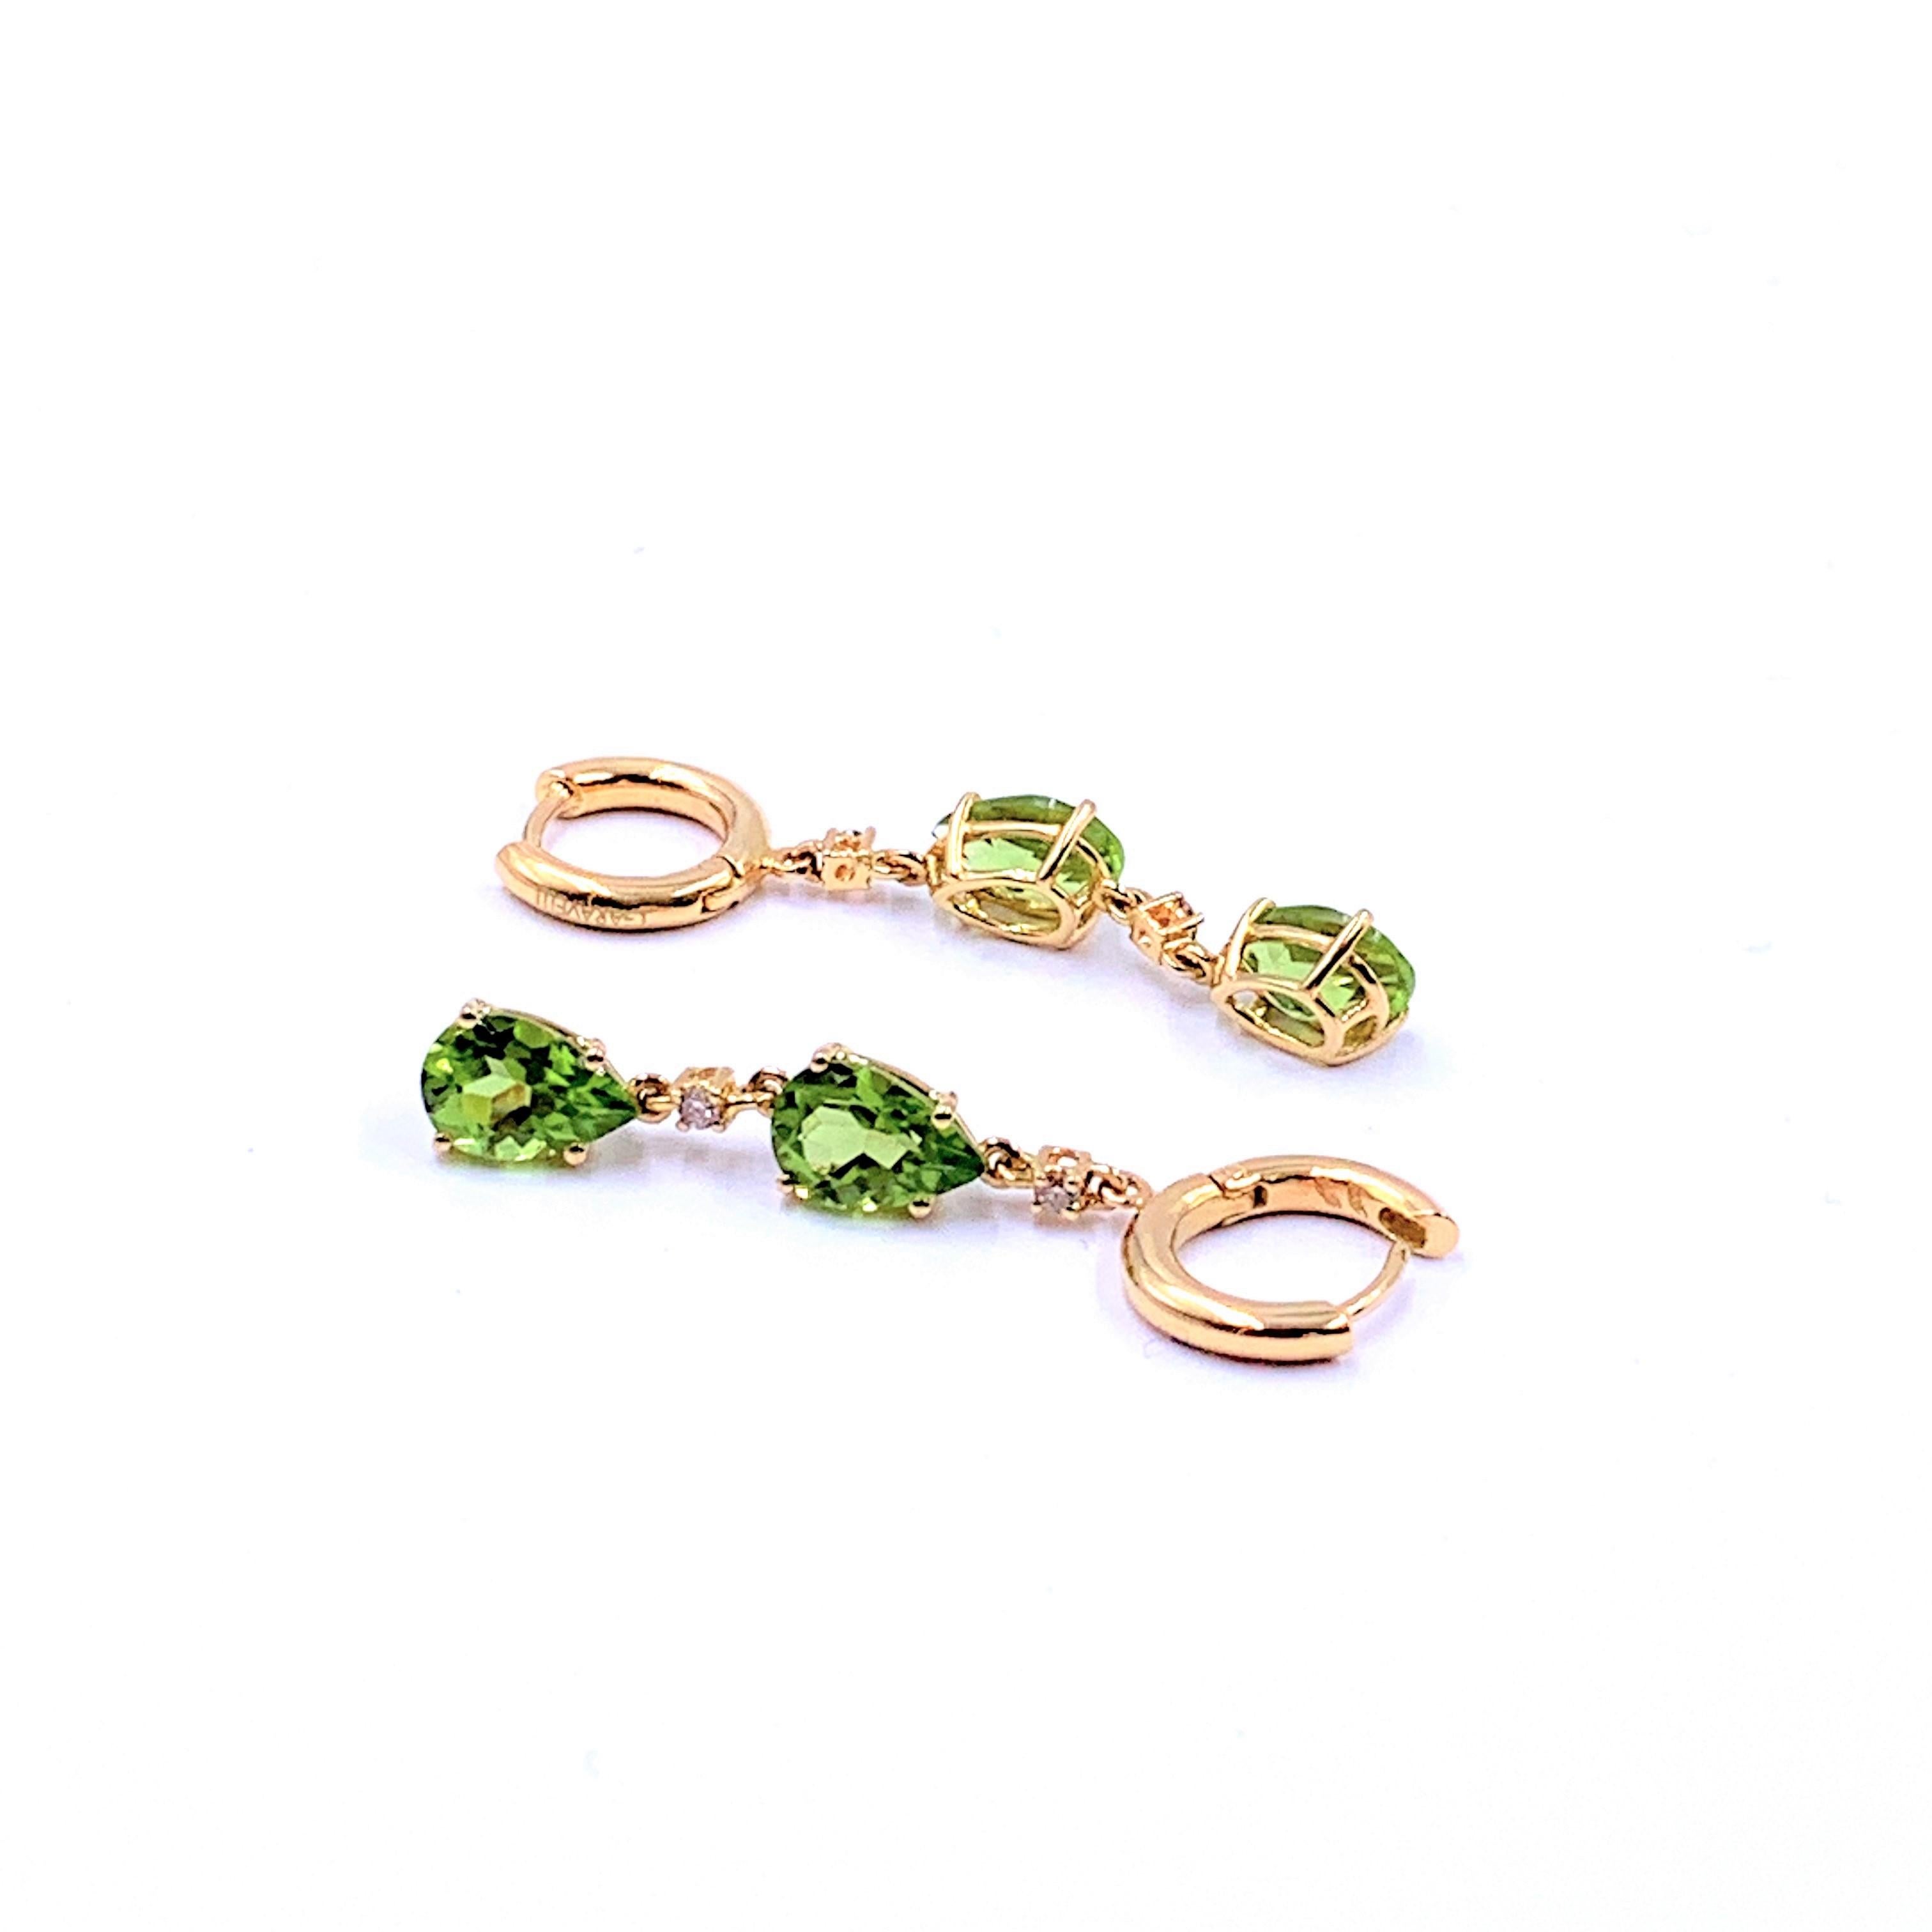 18KT Yellow Gold great quality  peridot drops with brown diamonds , made in Italy by GARAVELLI 
Earrings Lenght  mm.  40
GOLD gr : 5.00
BROWN DIAMONDS ct  : 0,12
DROP SHAPE GREEN TOURMALINES ct : 5.70